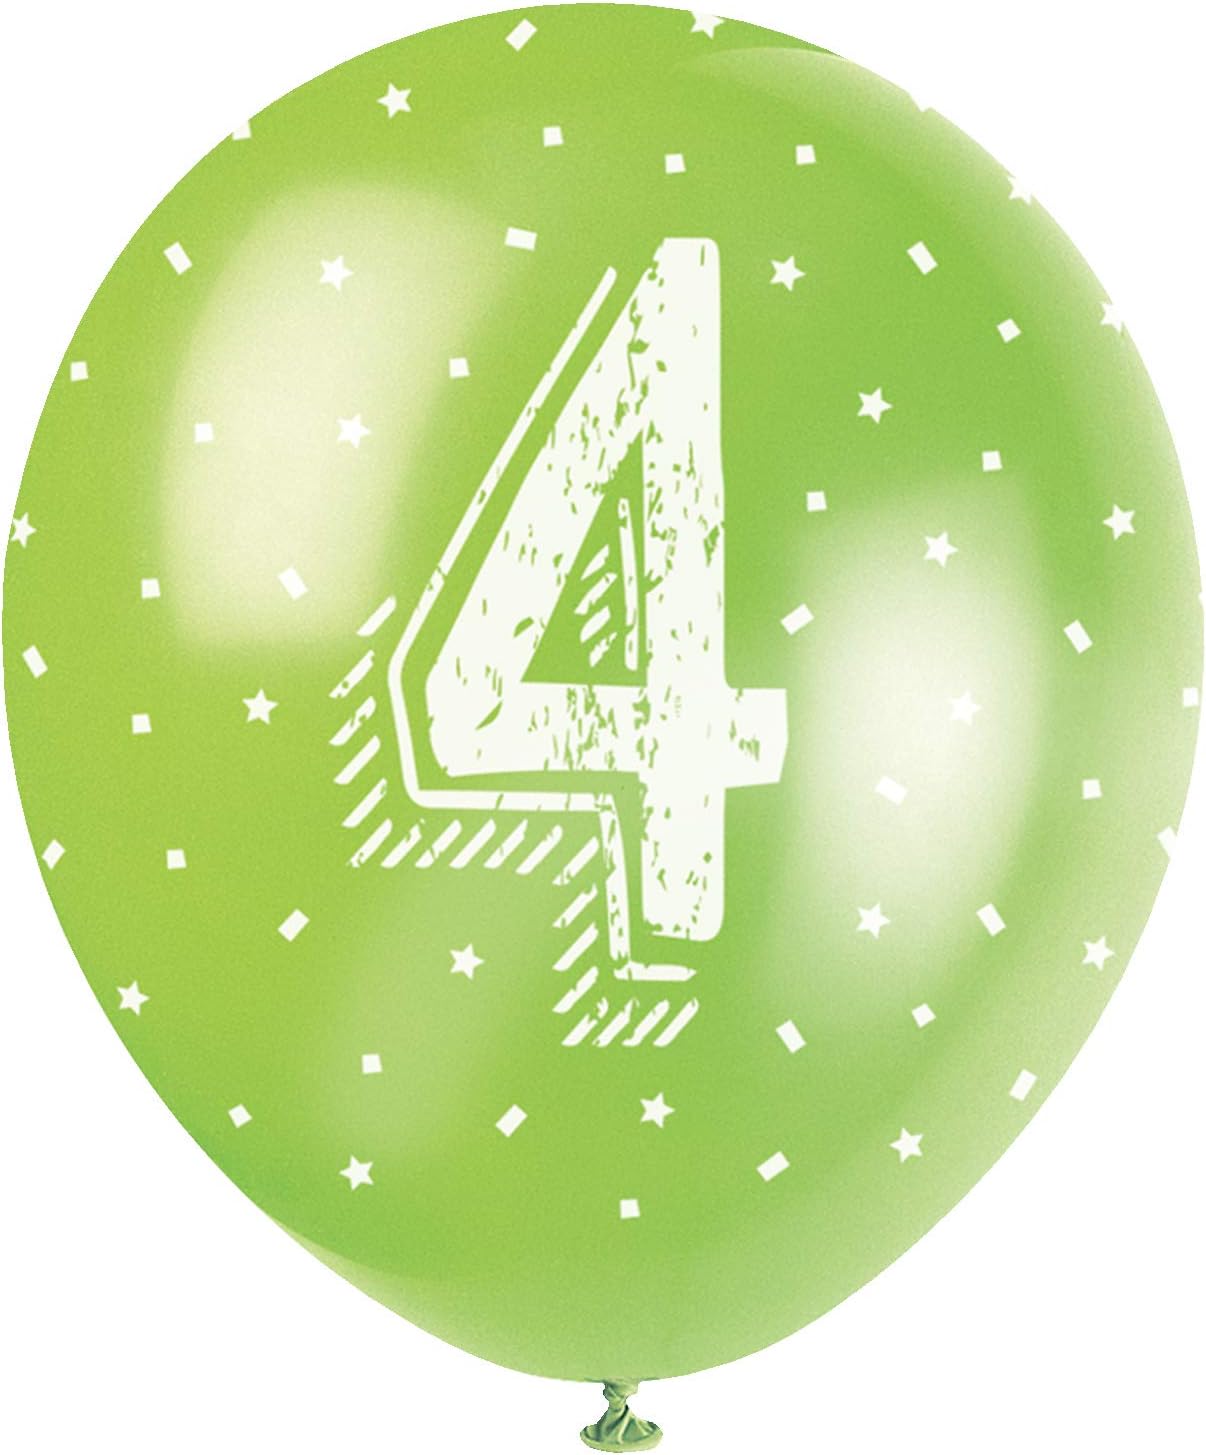 Pack of 5 Number 4 12" Latex Balloons